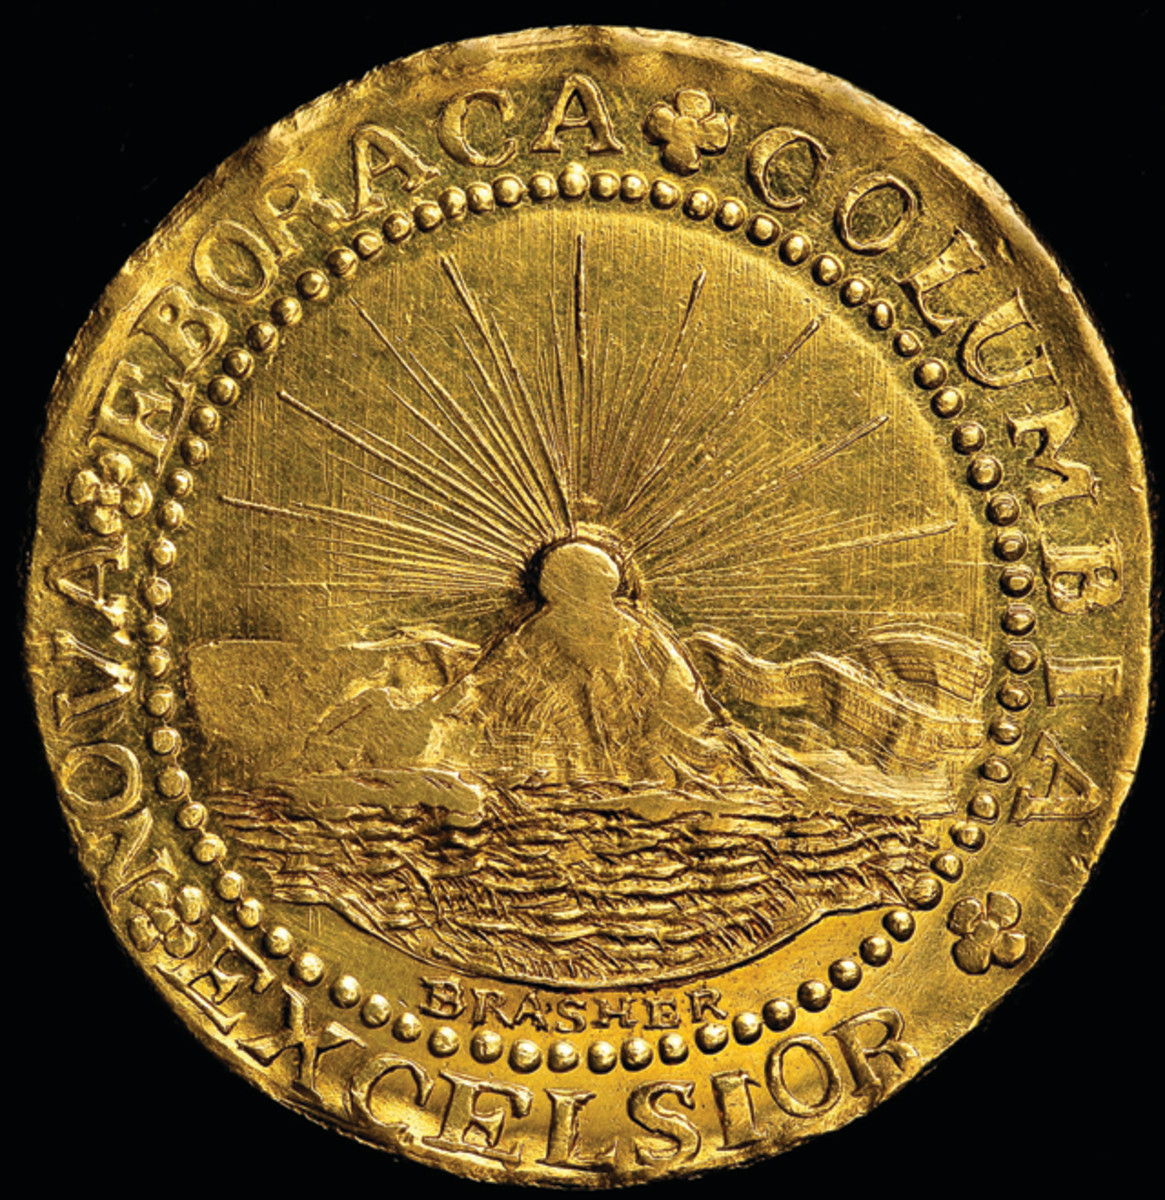 The 1787 Brasher doubloon took top place in 2014 auction results,